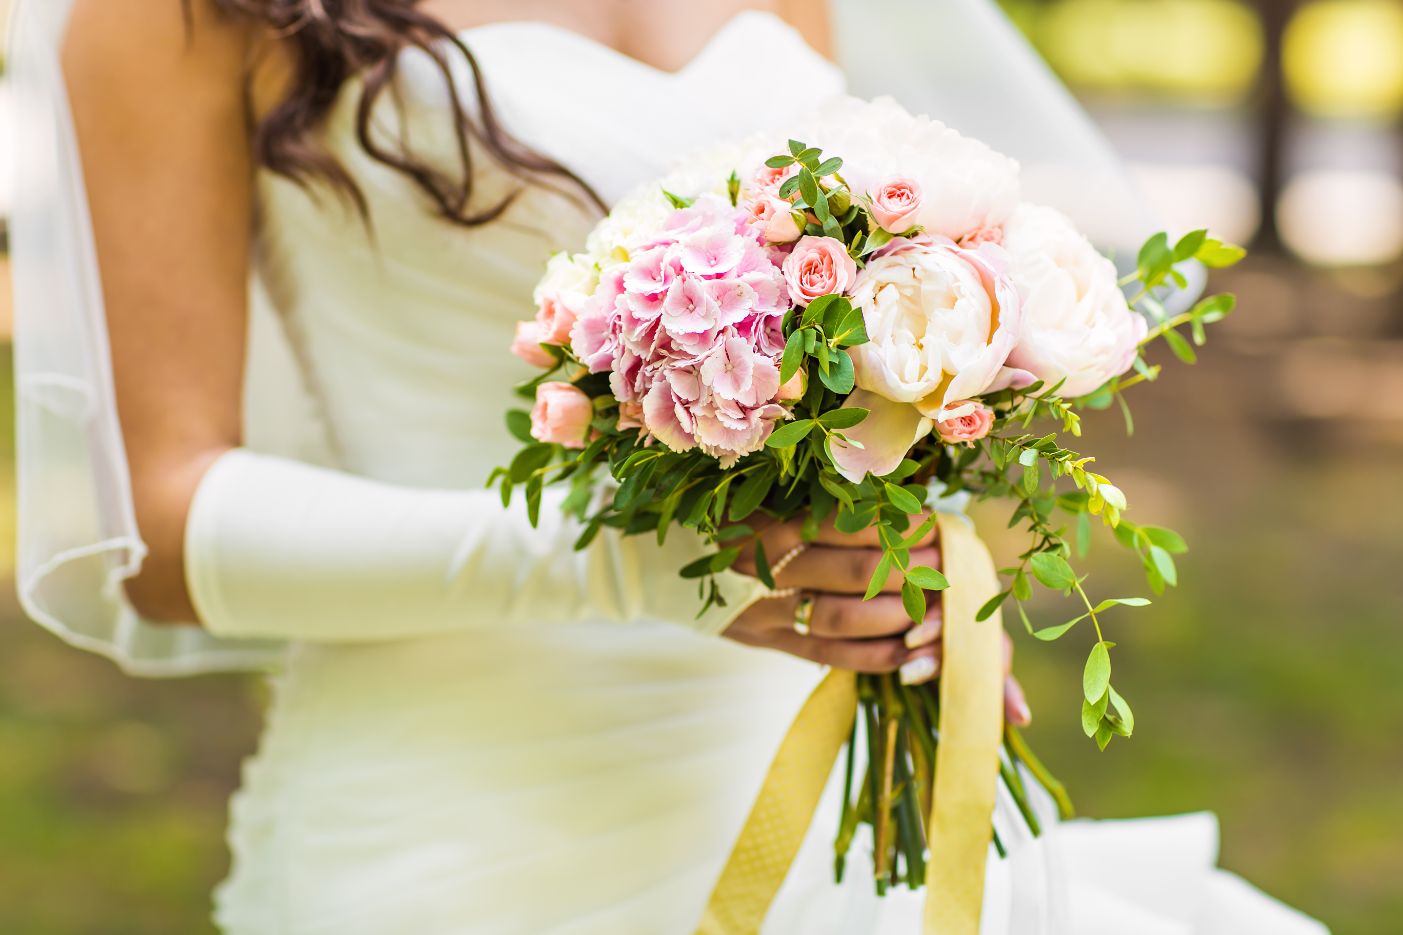 Five ways to make your wedding more ethical